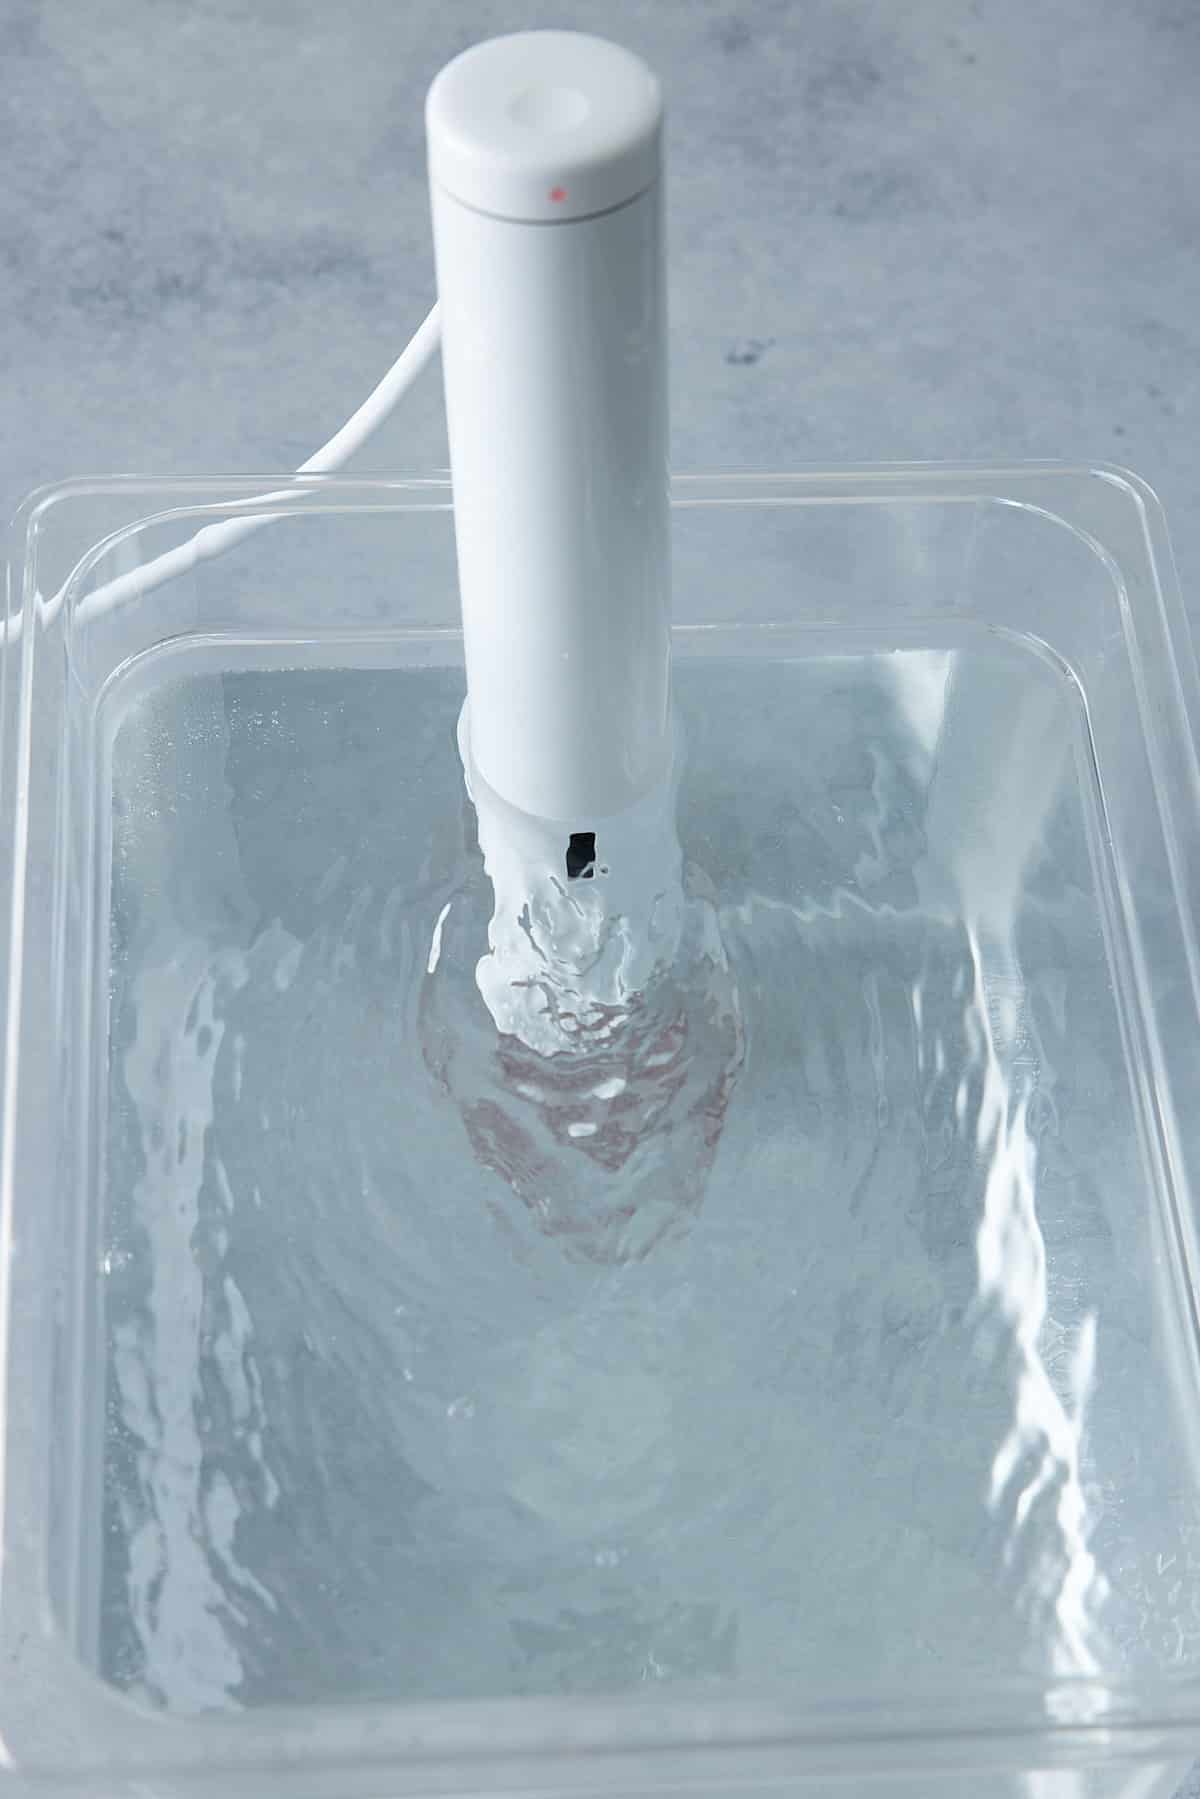 Sous vide water bath with immersion circulator attached